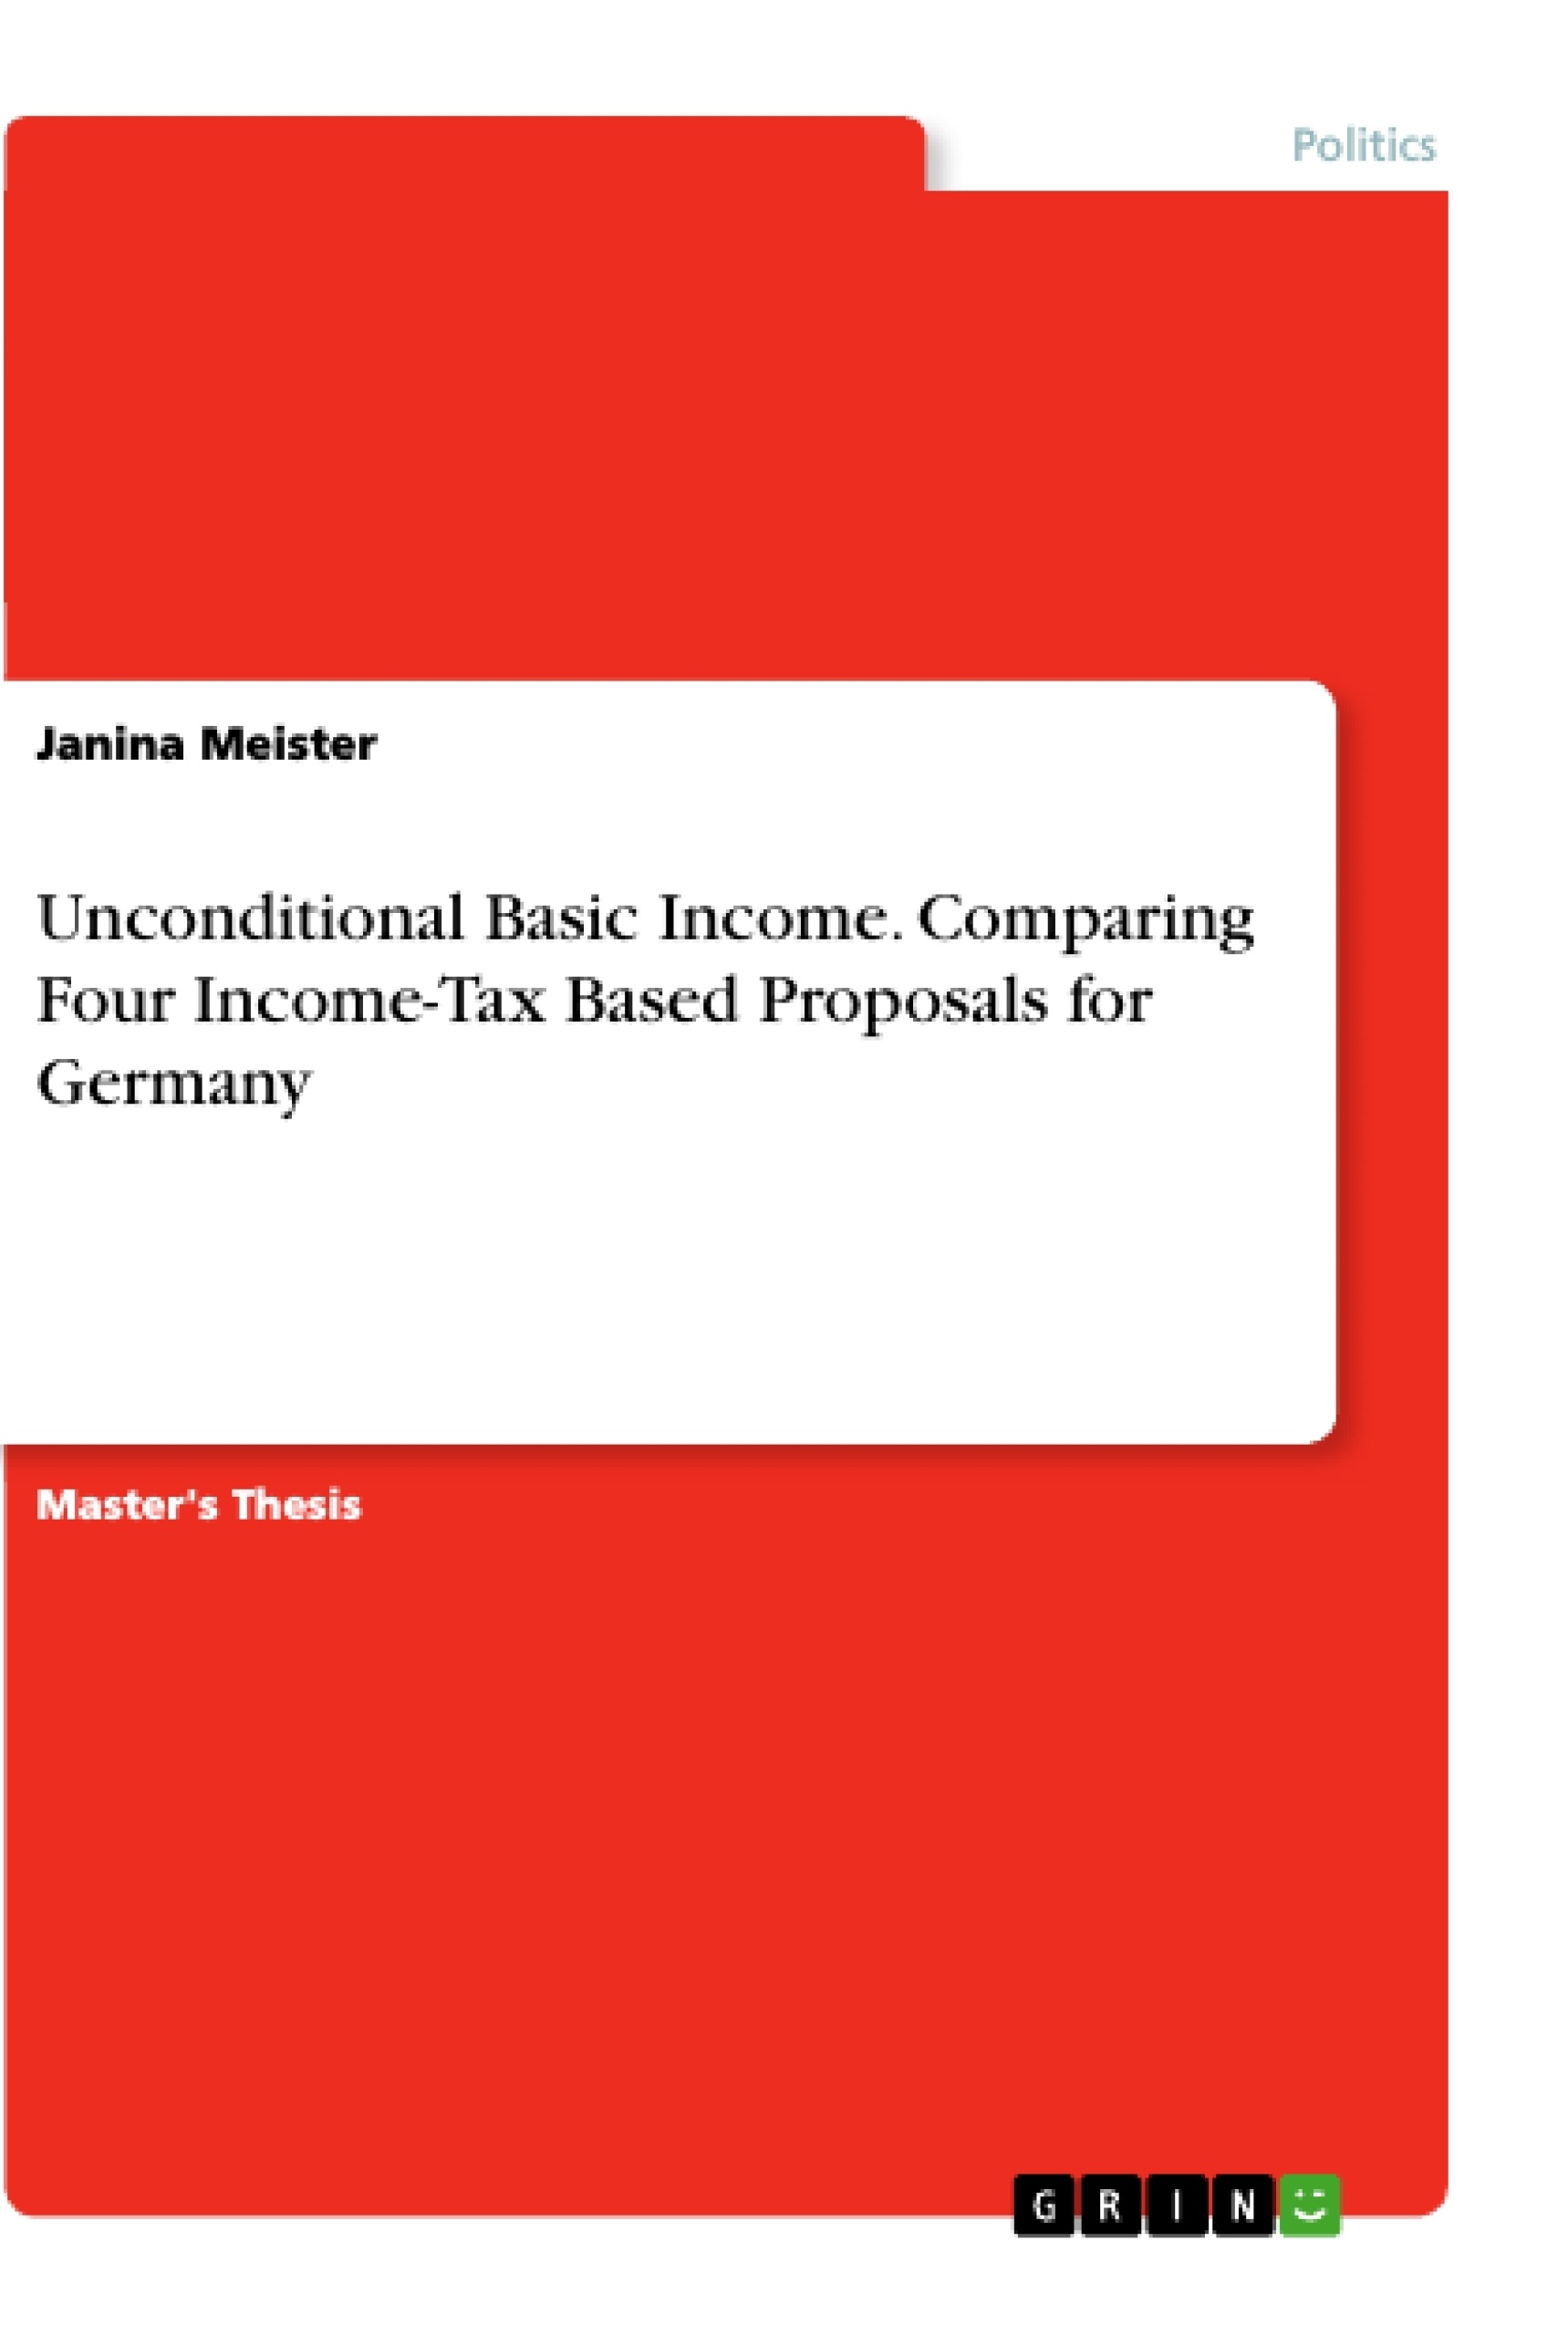 Titel: Unconditional Basic Income. Comparing Four Income-Tax Based Proposals for Germany